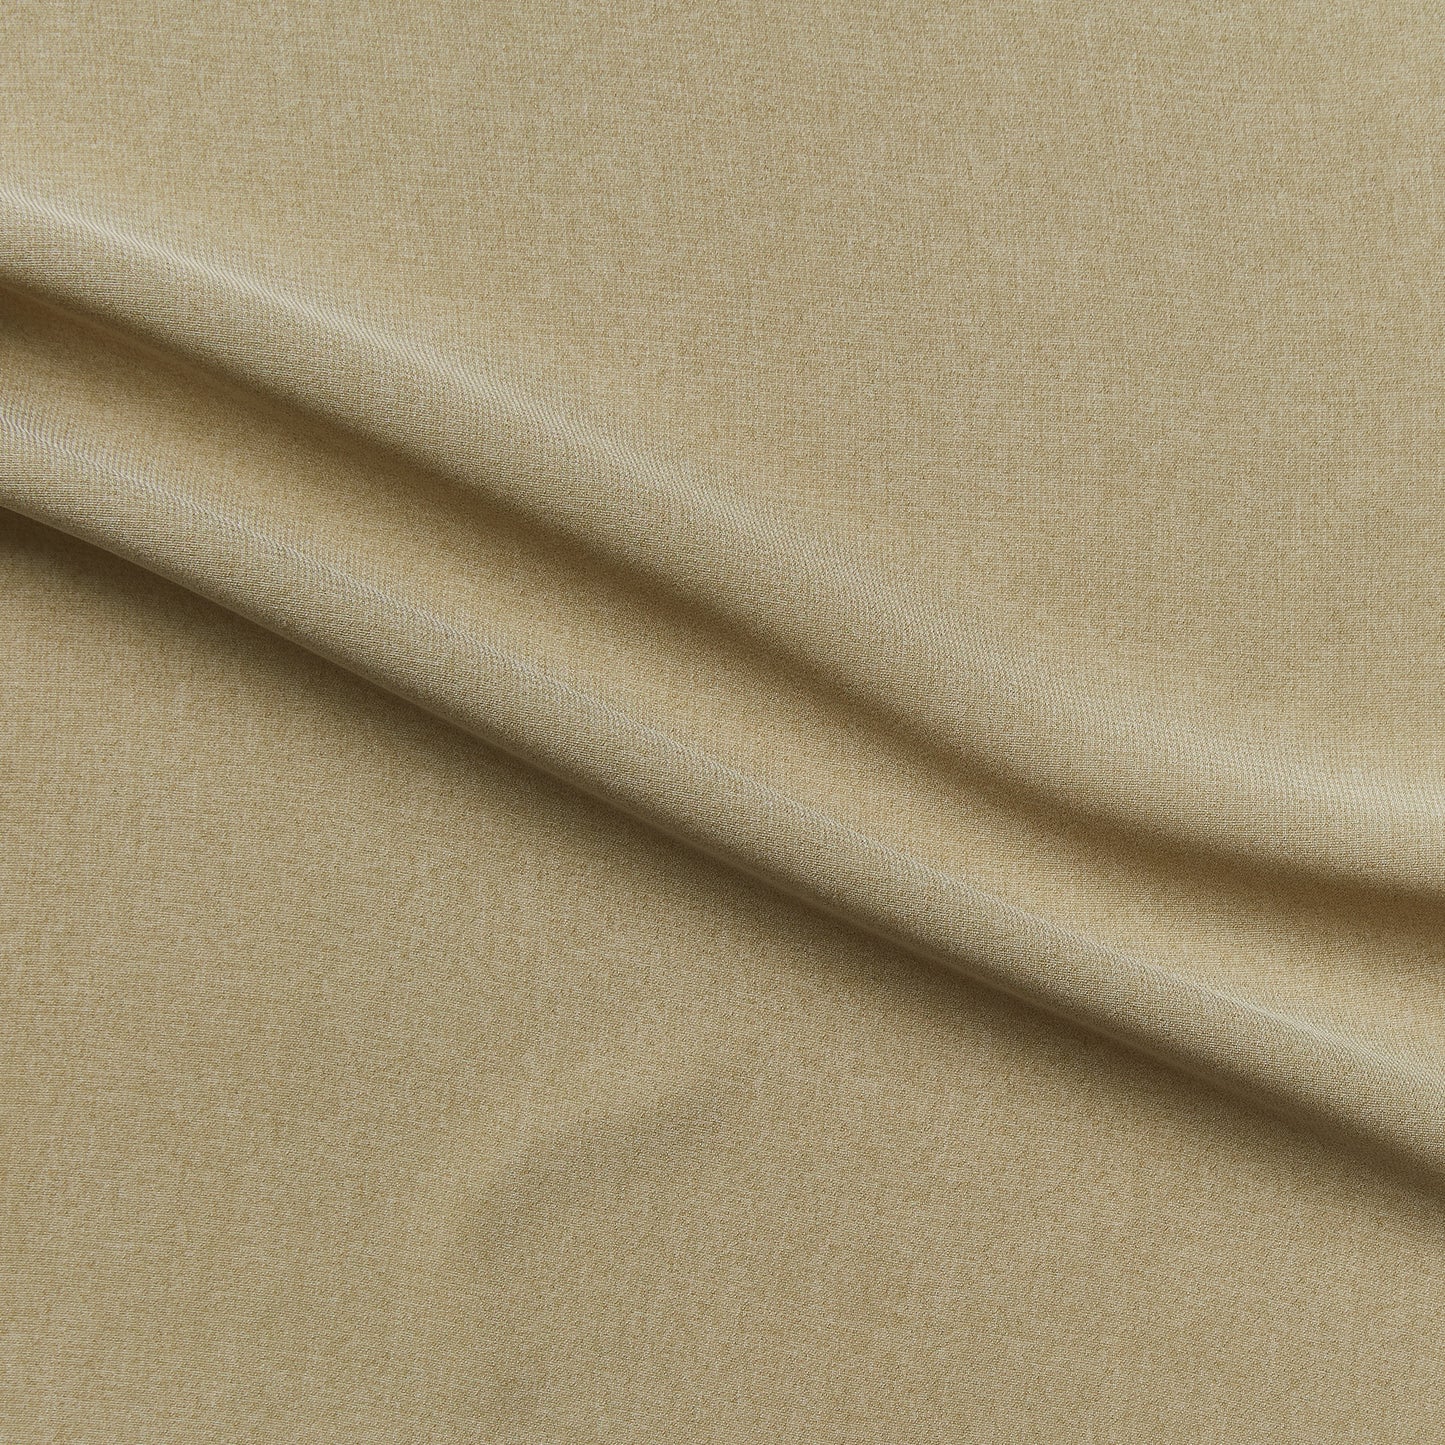 nicola featuring the taupe colored version of a soft semi sheer solid woven pure polyester with fluid drape